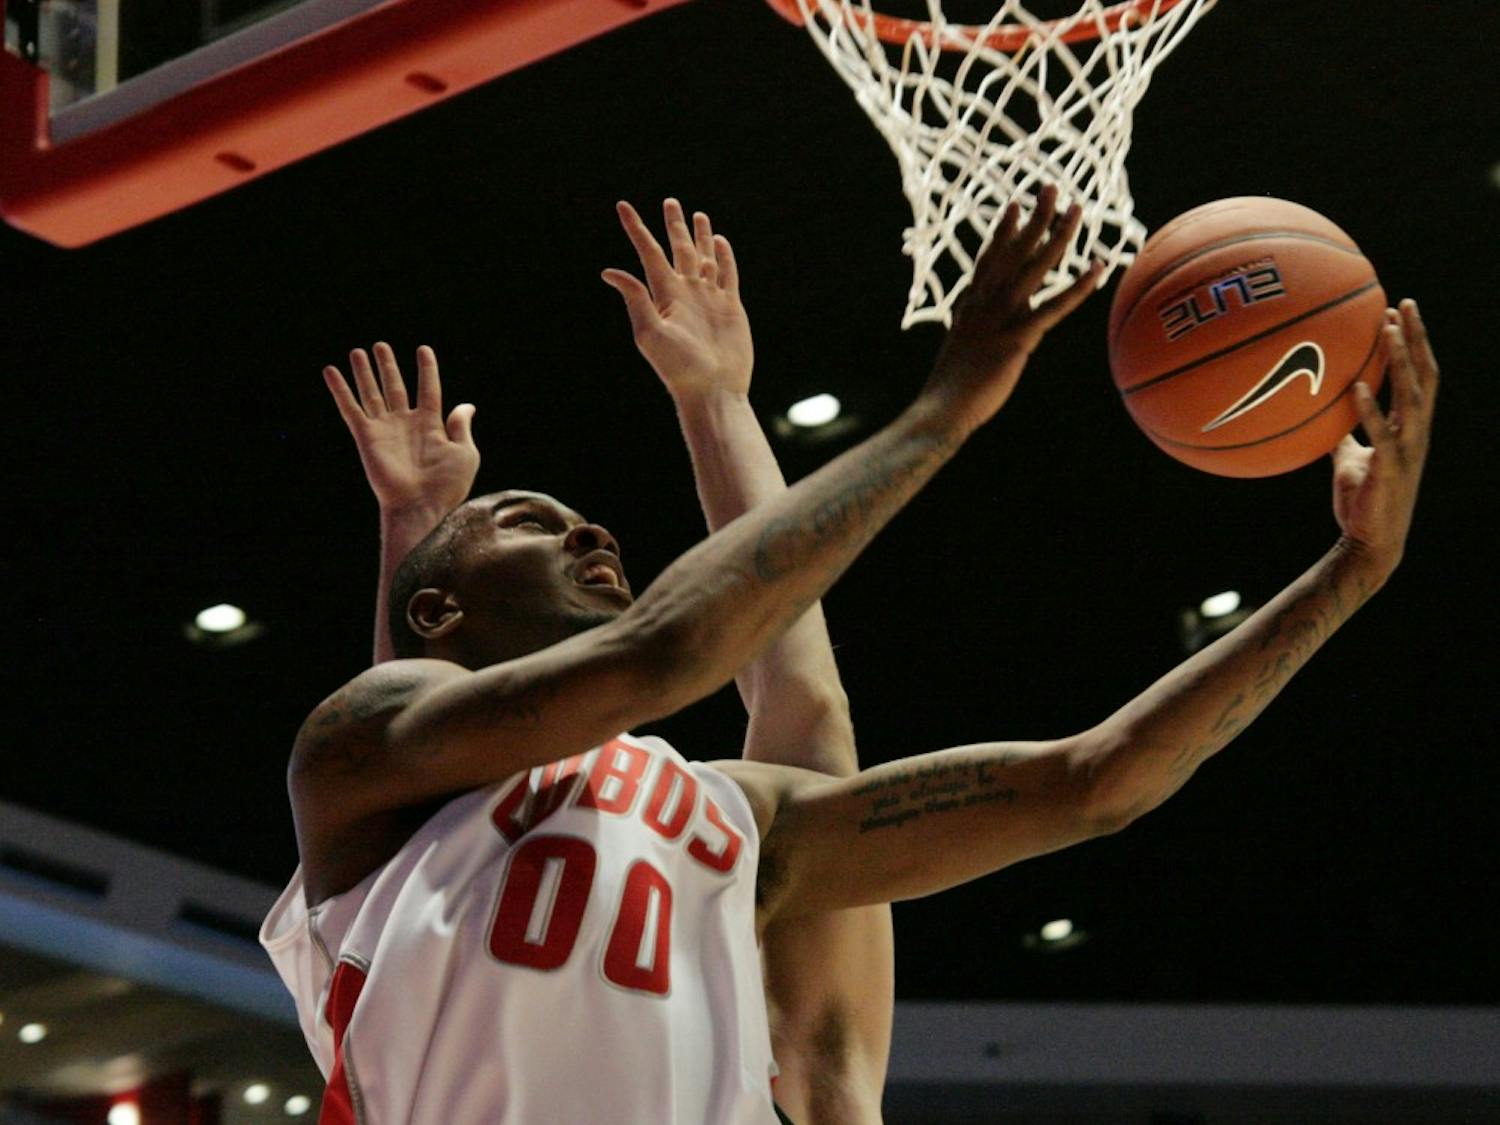 	UNM forward A.J. Hardeman shields his defender on the way to the basket Tuesday at The Pit. The Lobos defeated Eastern New Mexico 80-58 in their first exhibition game.